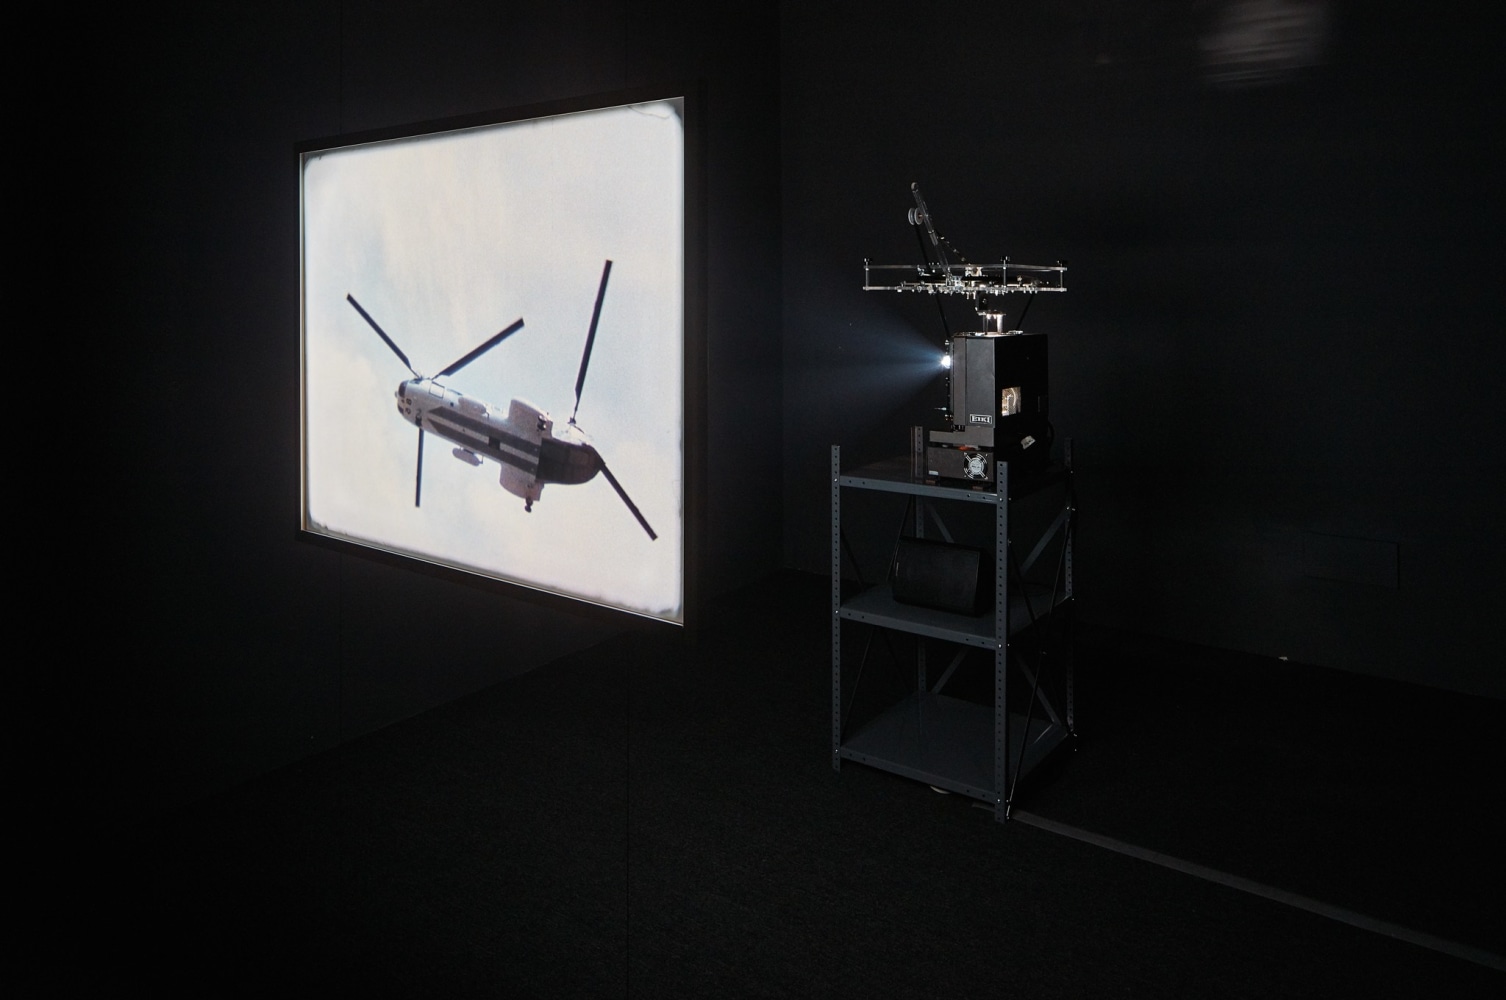 Jacob Kassay,&amp;nbsp;II,&amp;nbsp;2017

16 mm film, projector, and looper

Loop, color, sound

Installation view:&amp;nbsp;Mechanisms, at The Wattis Institute for Contemporary Arts, 2017